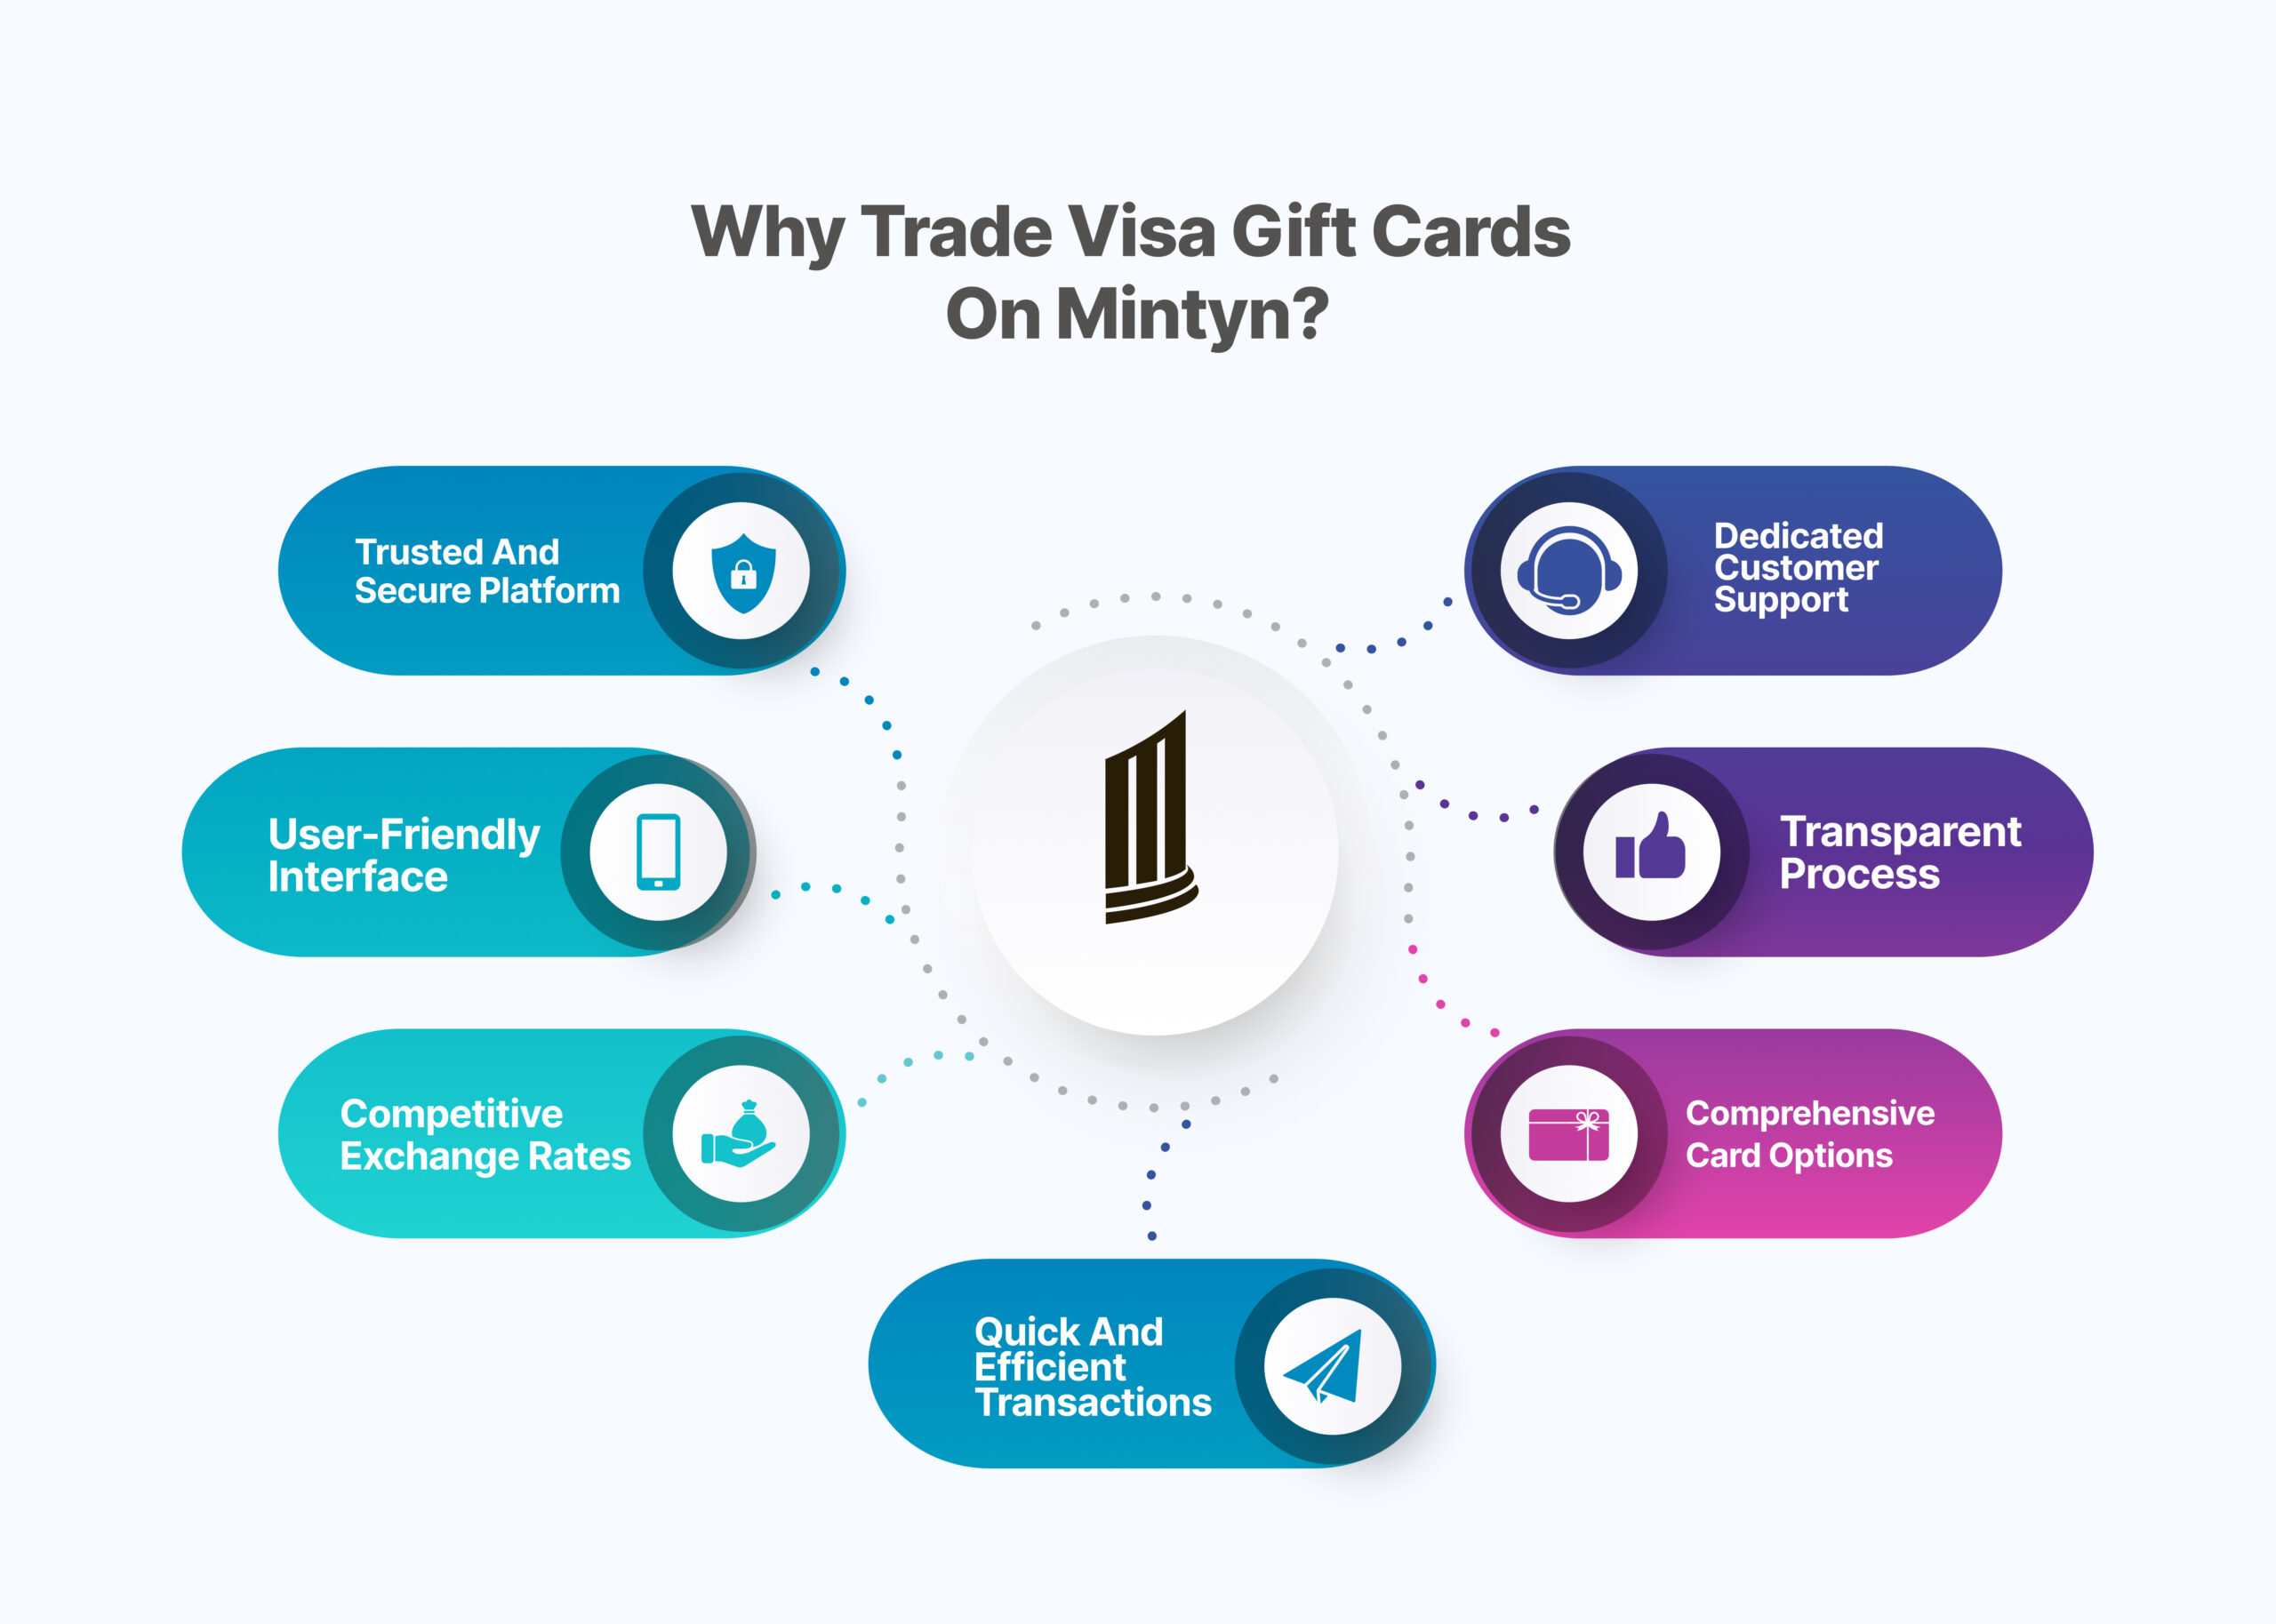 Why trade visa gift cards on Mintyn